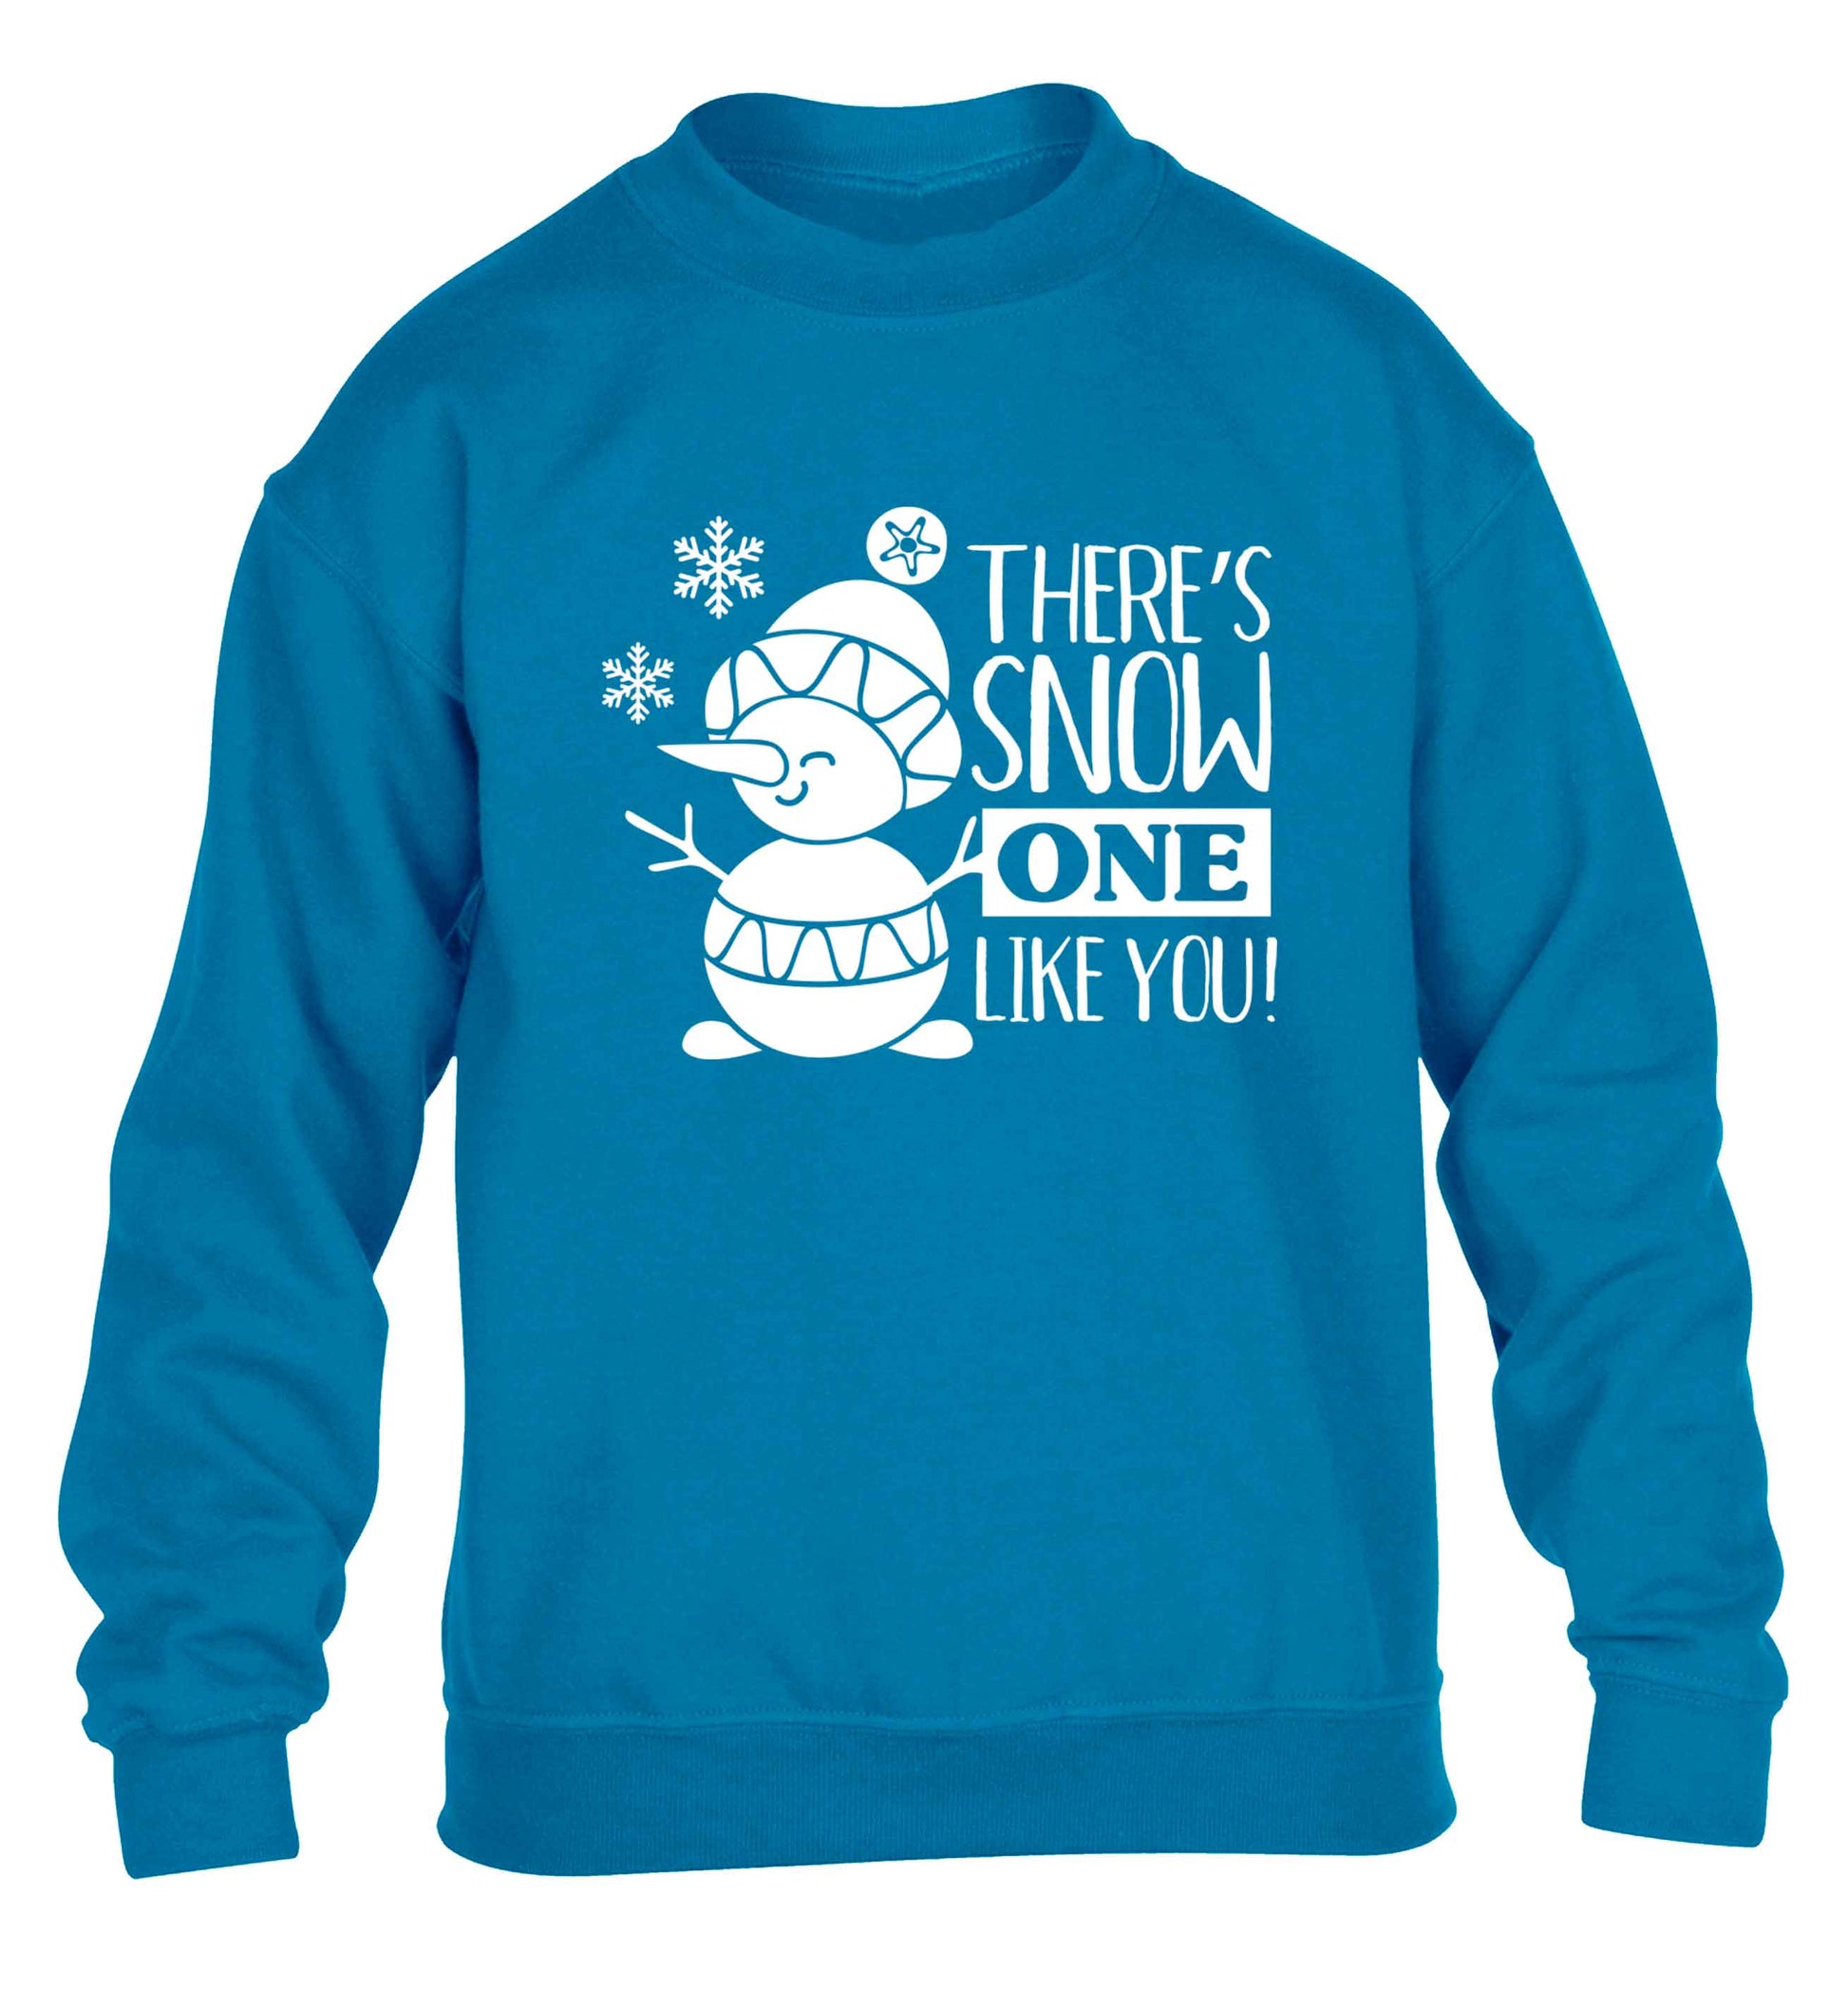 There's snow one like you children's blue sweater 12-13 Years